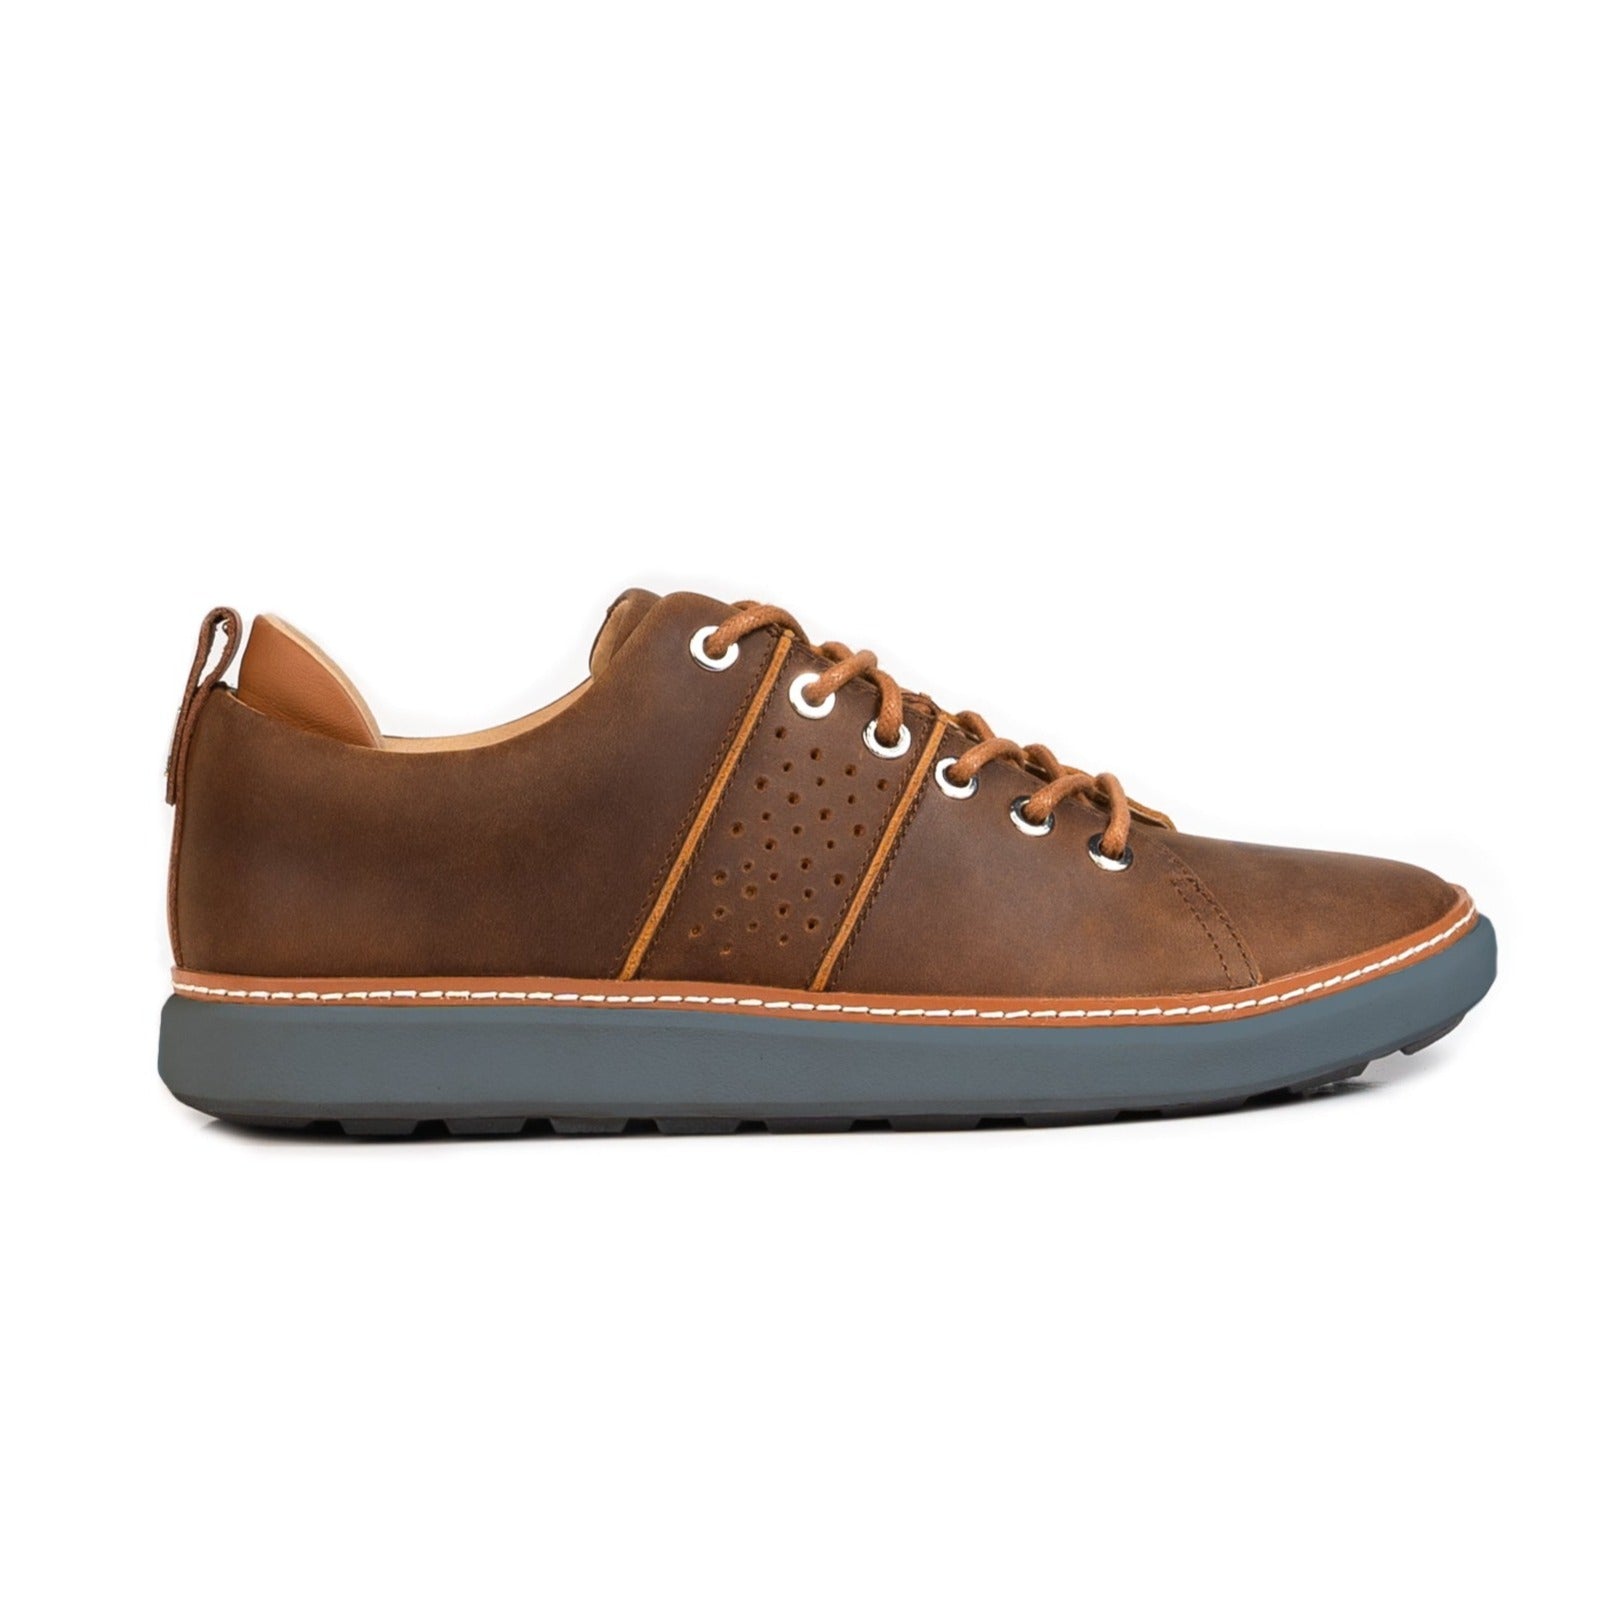 Classic Walker • Brown and Grey Leather